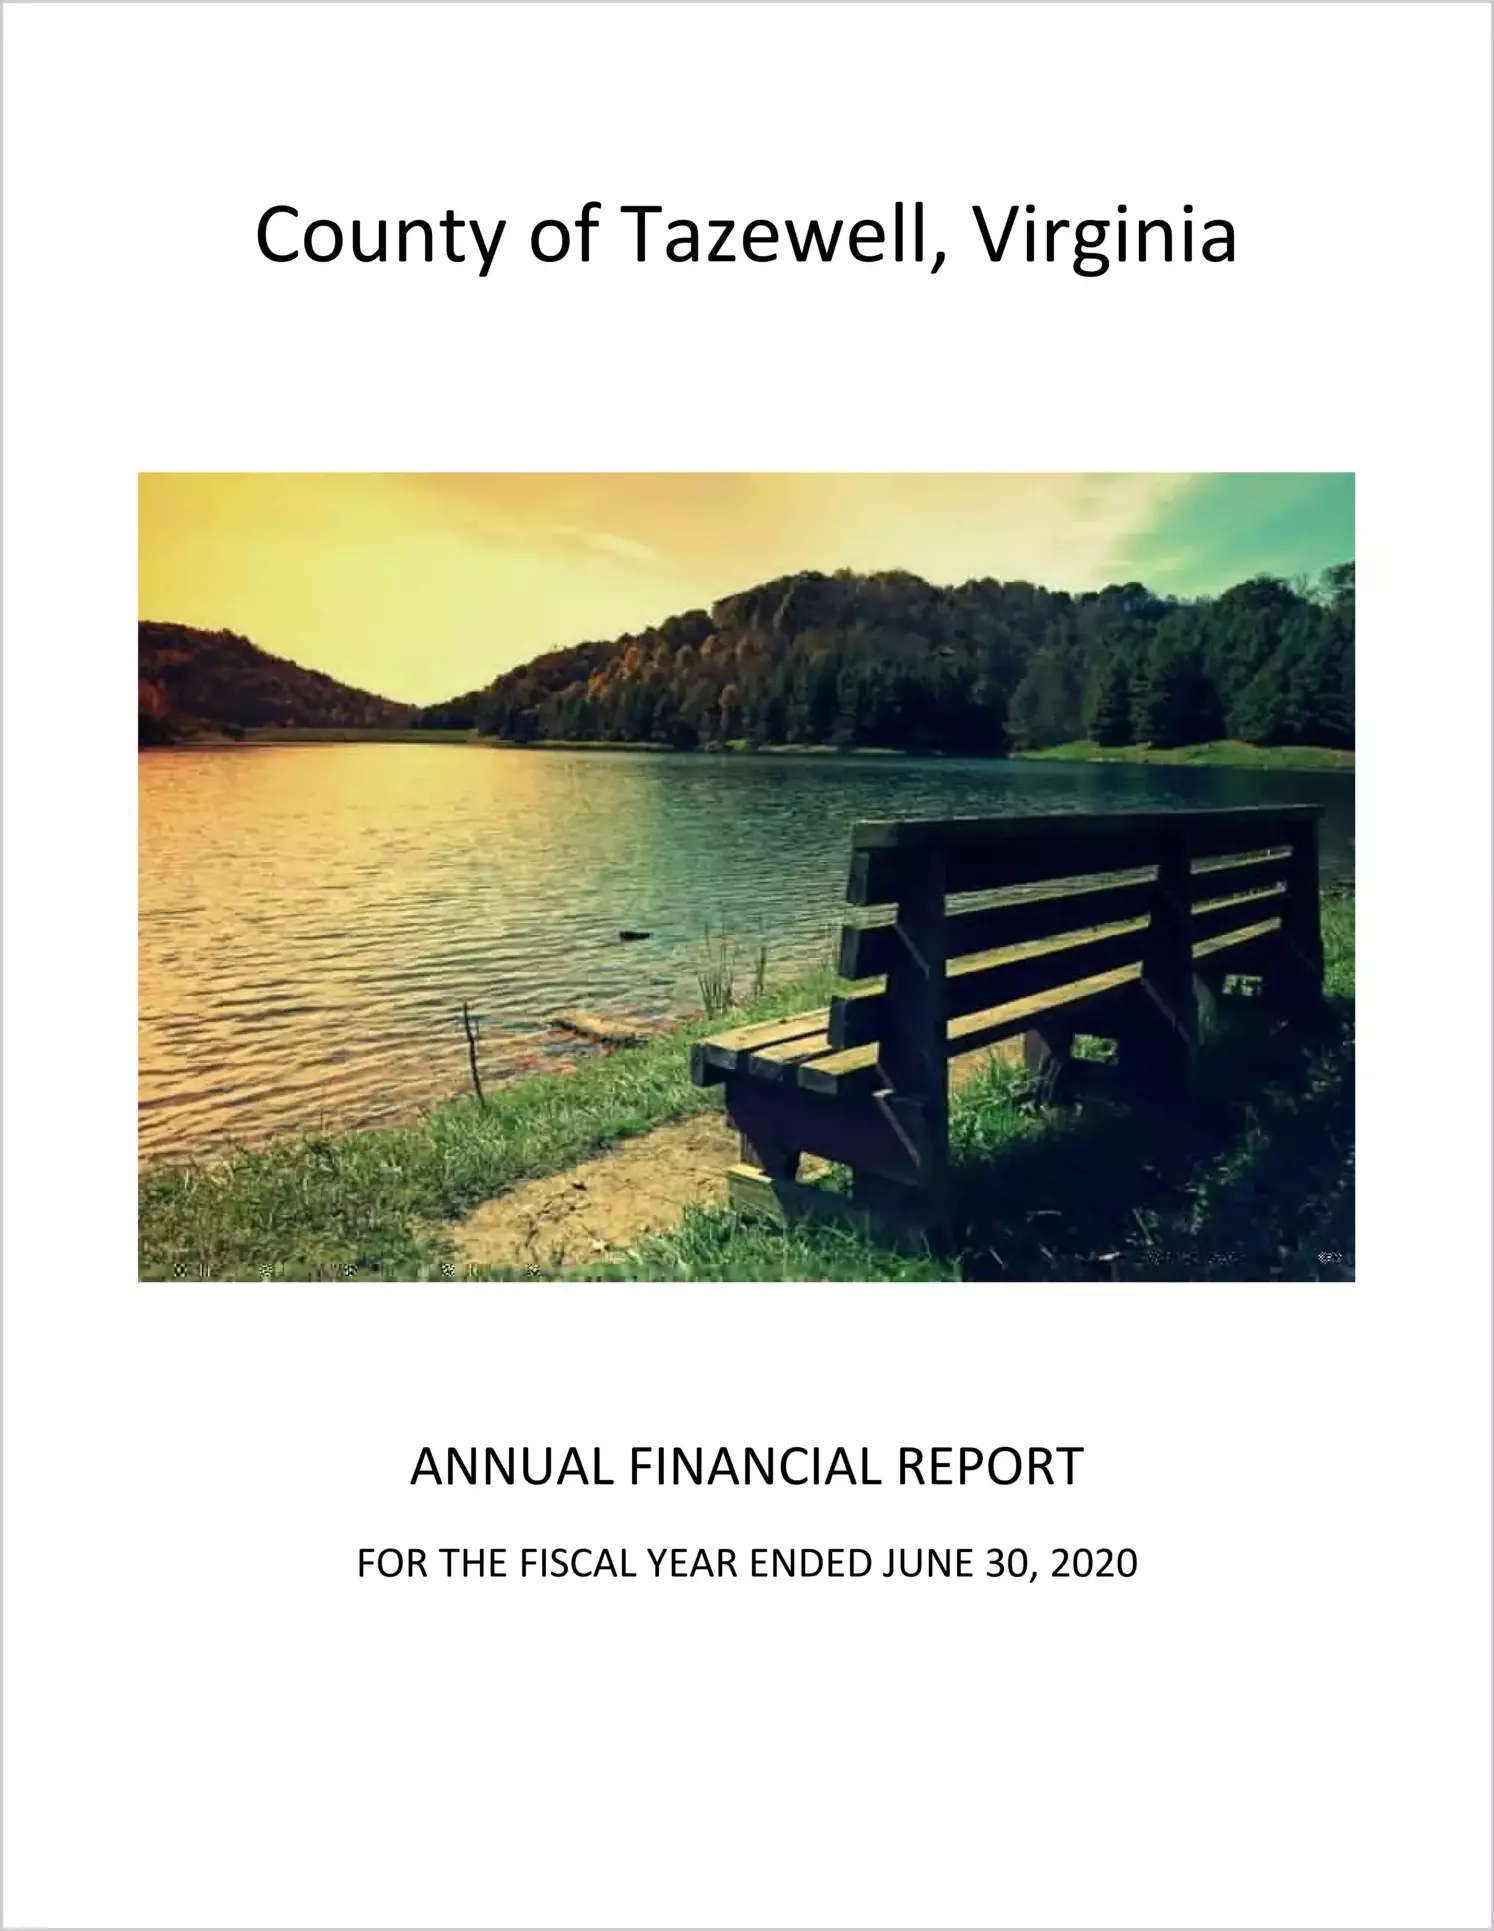 2020 Annual Financial Report for County of Tazewell